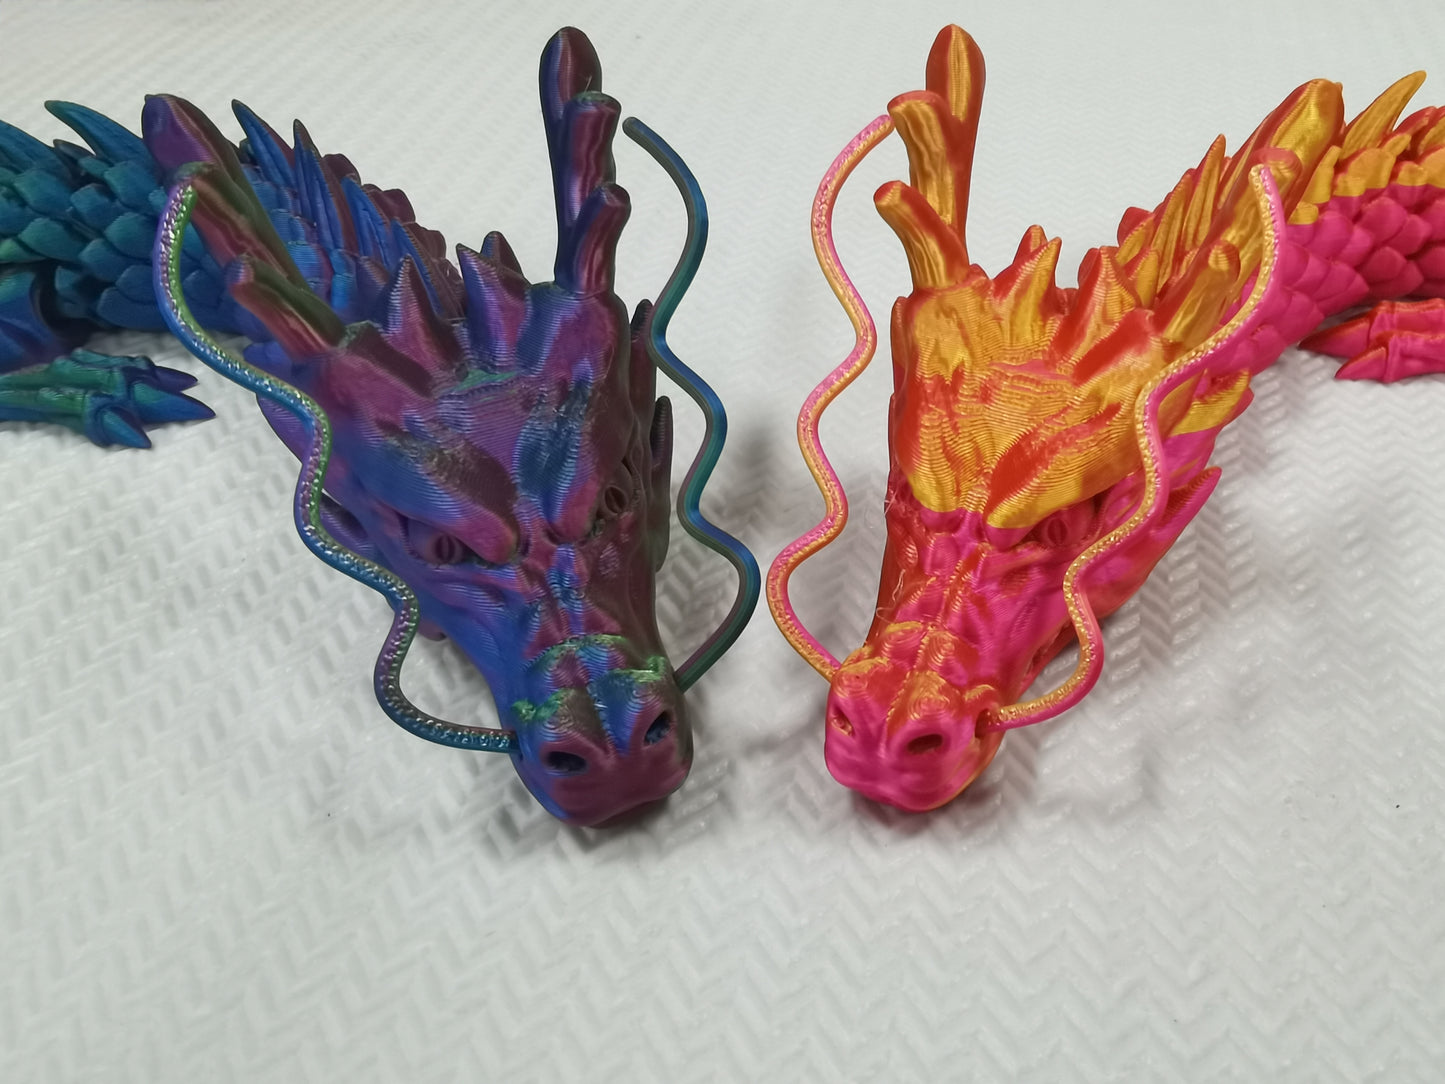 Chinese toy-3D printing toys.